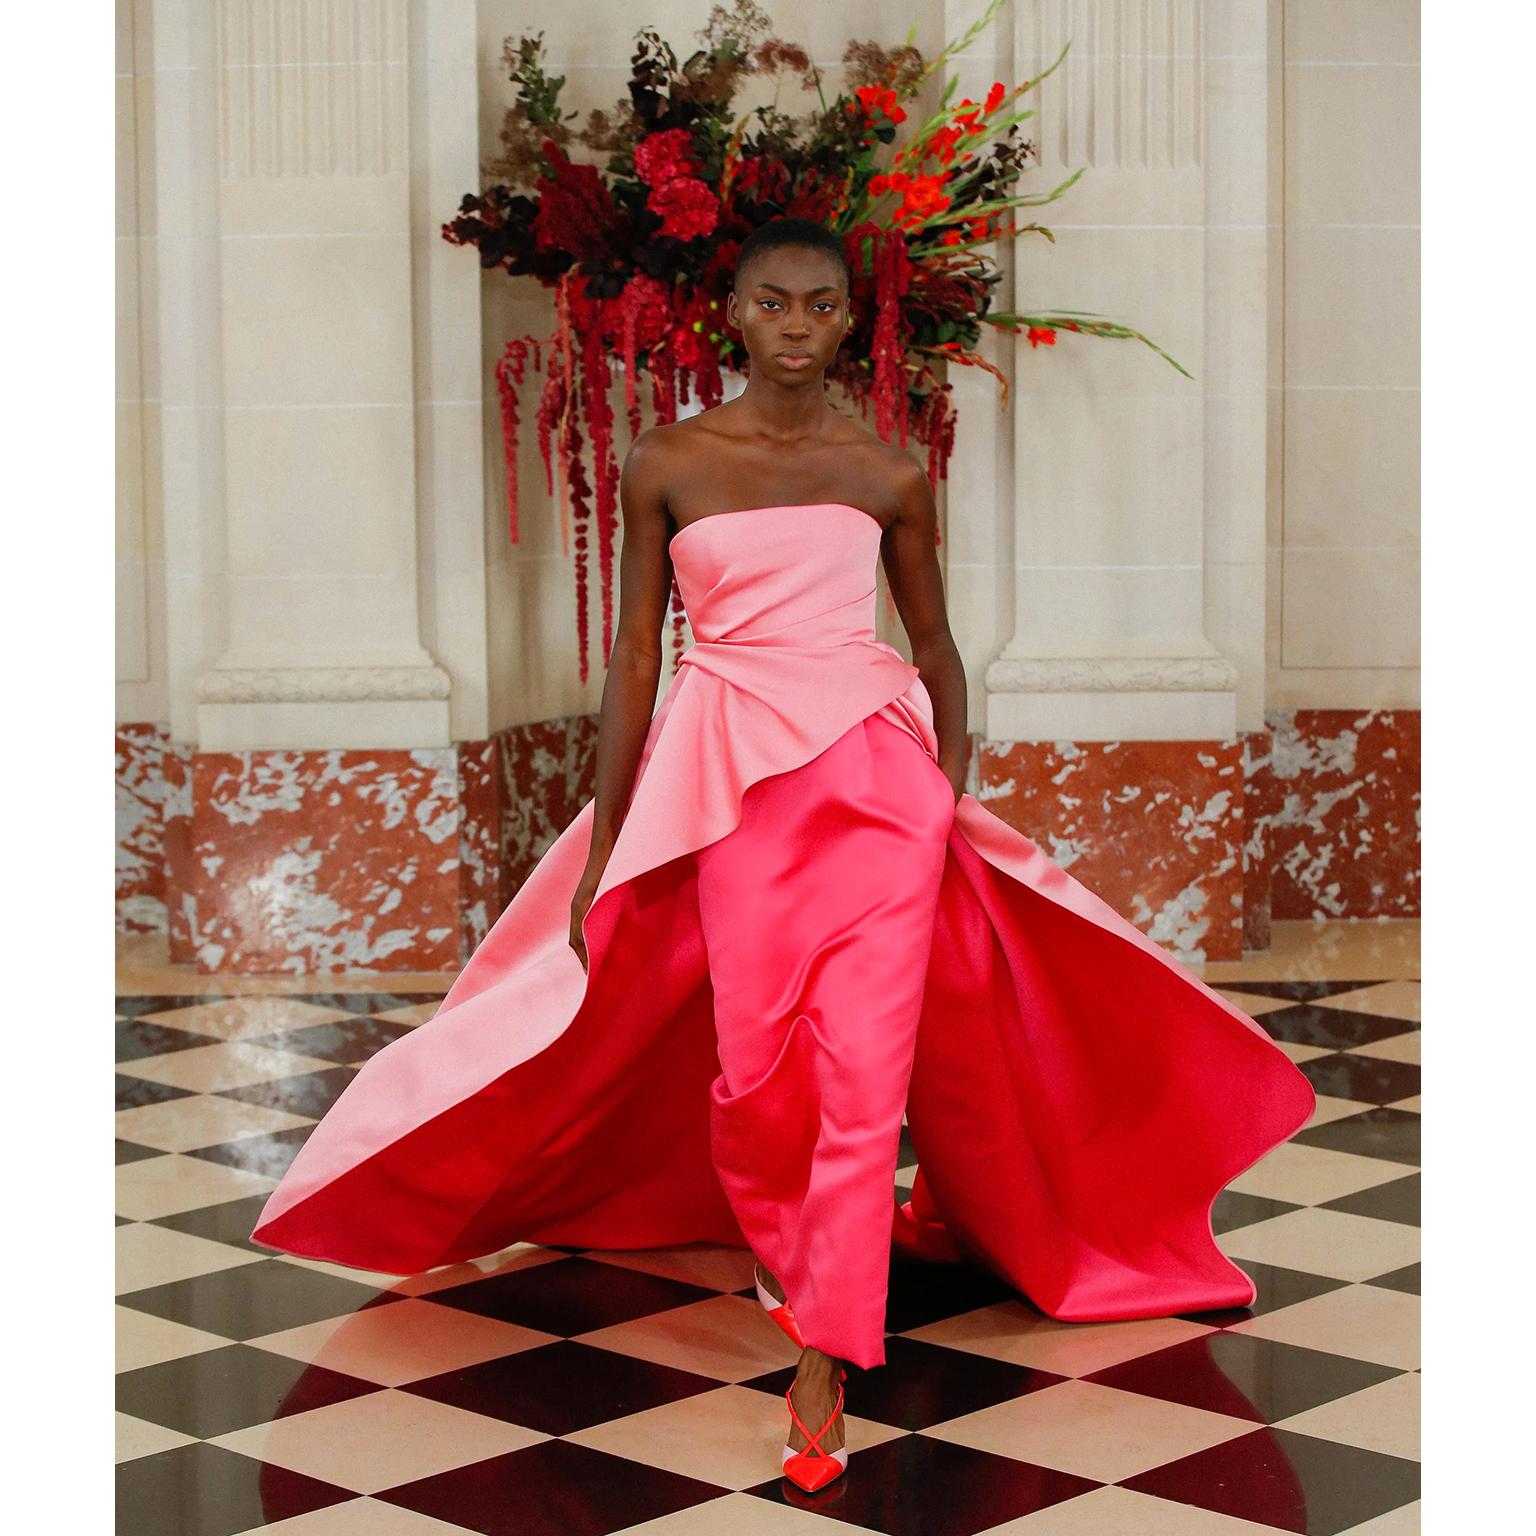 This Carolina Herrera Spring / Summer 2022 evening dress is brand new with the tags still attached. Wes Gordon's 2022 designs for Carolina Herrera are some of his best and this dress is a stunning example of his interpretation of the original